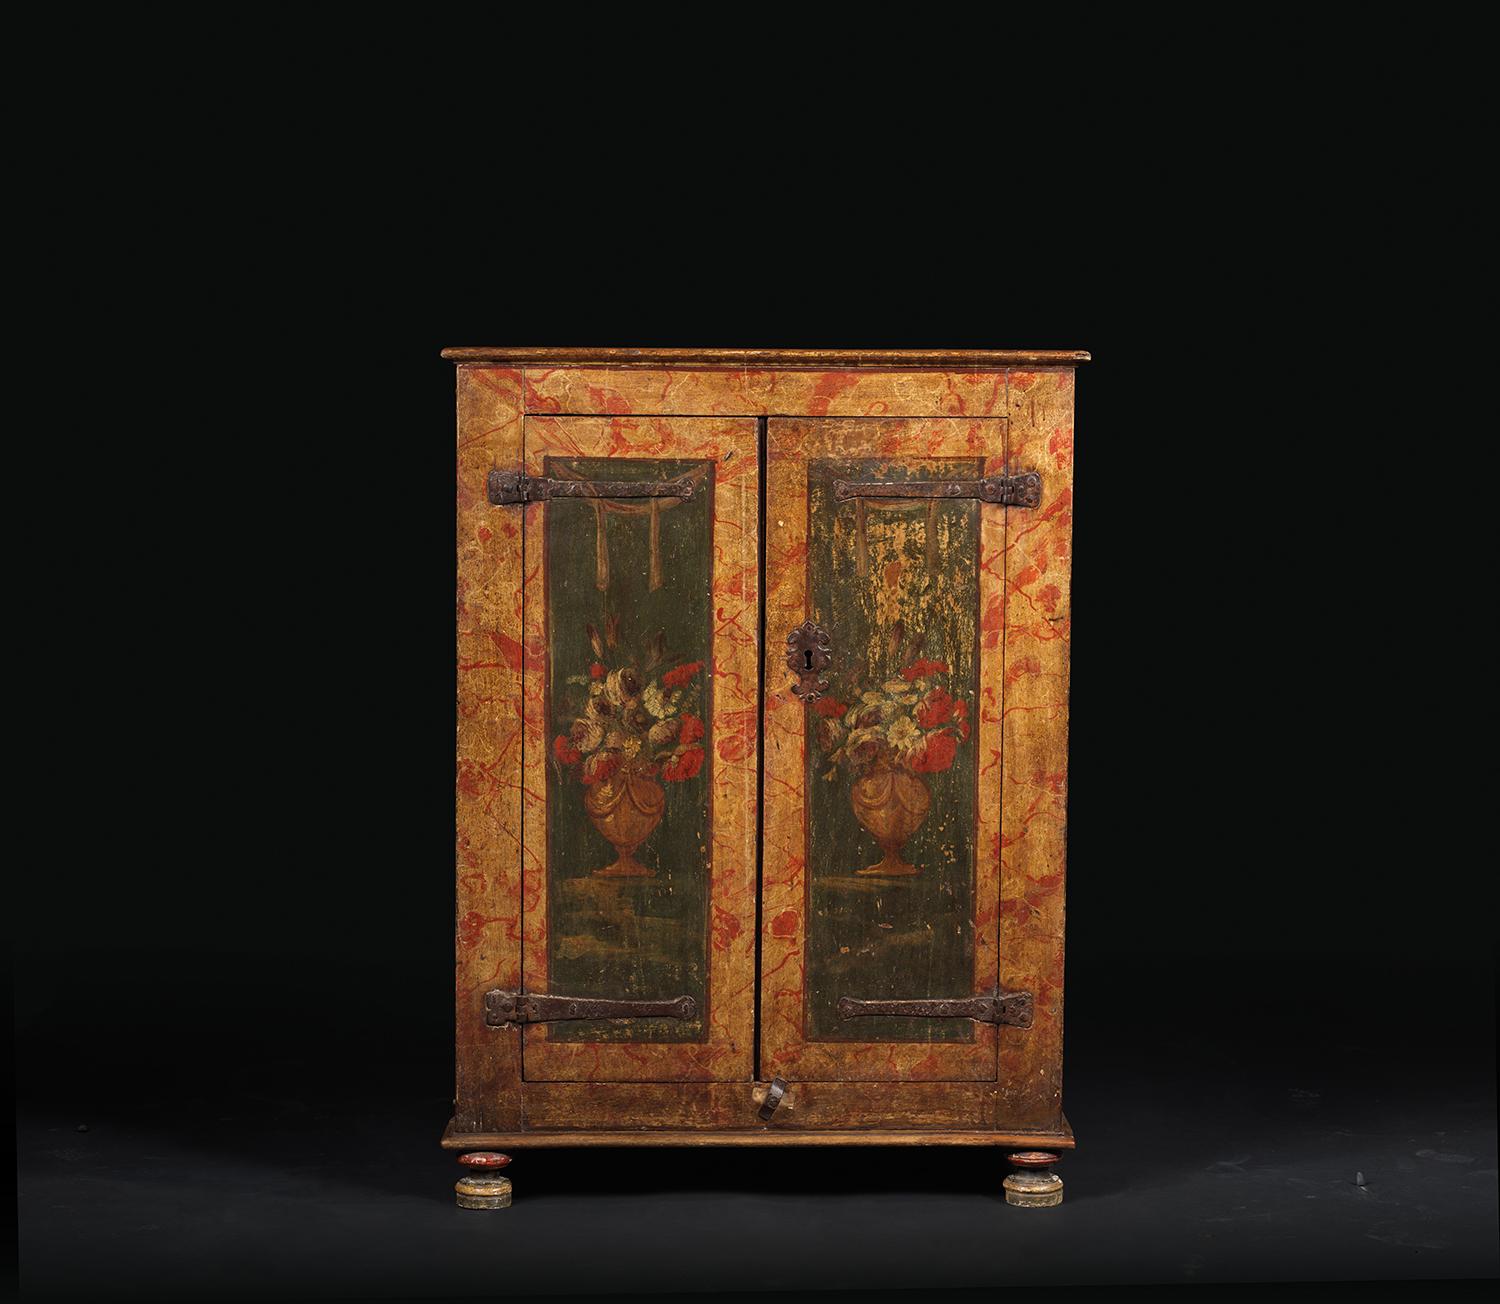 This low, small sized cabinet opens thanks two door-leaves adorned with flowers and drapes. The rest of the cabinet bears a painted decor emulating marble with red veins.